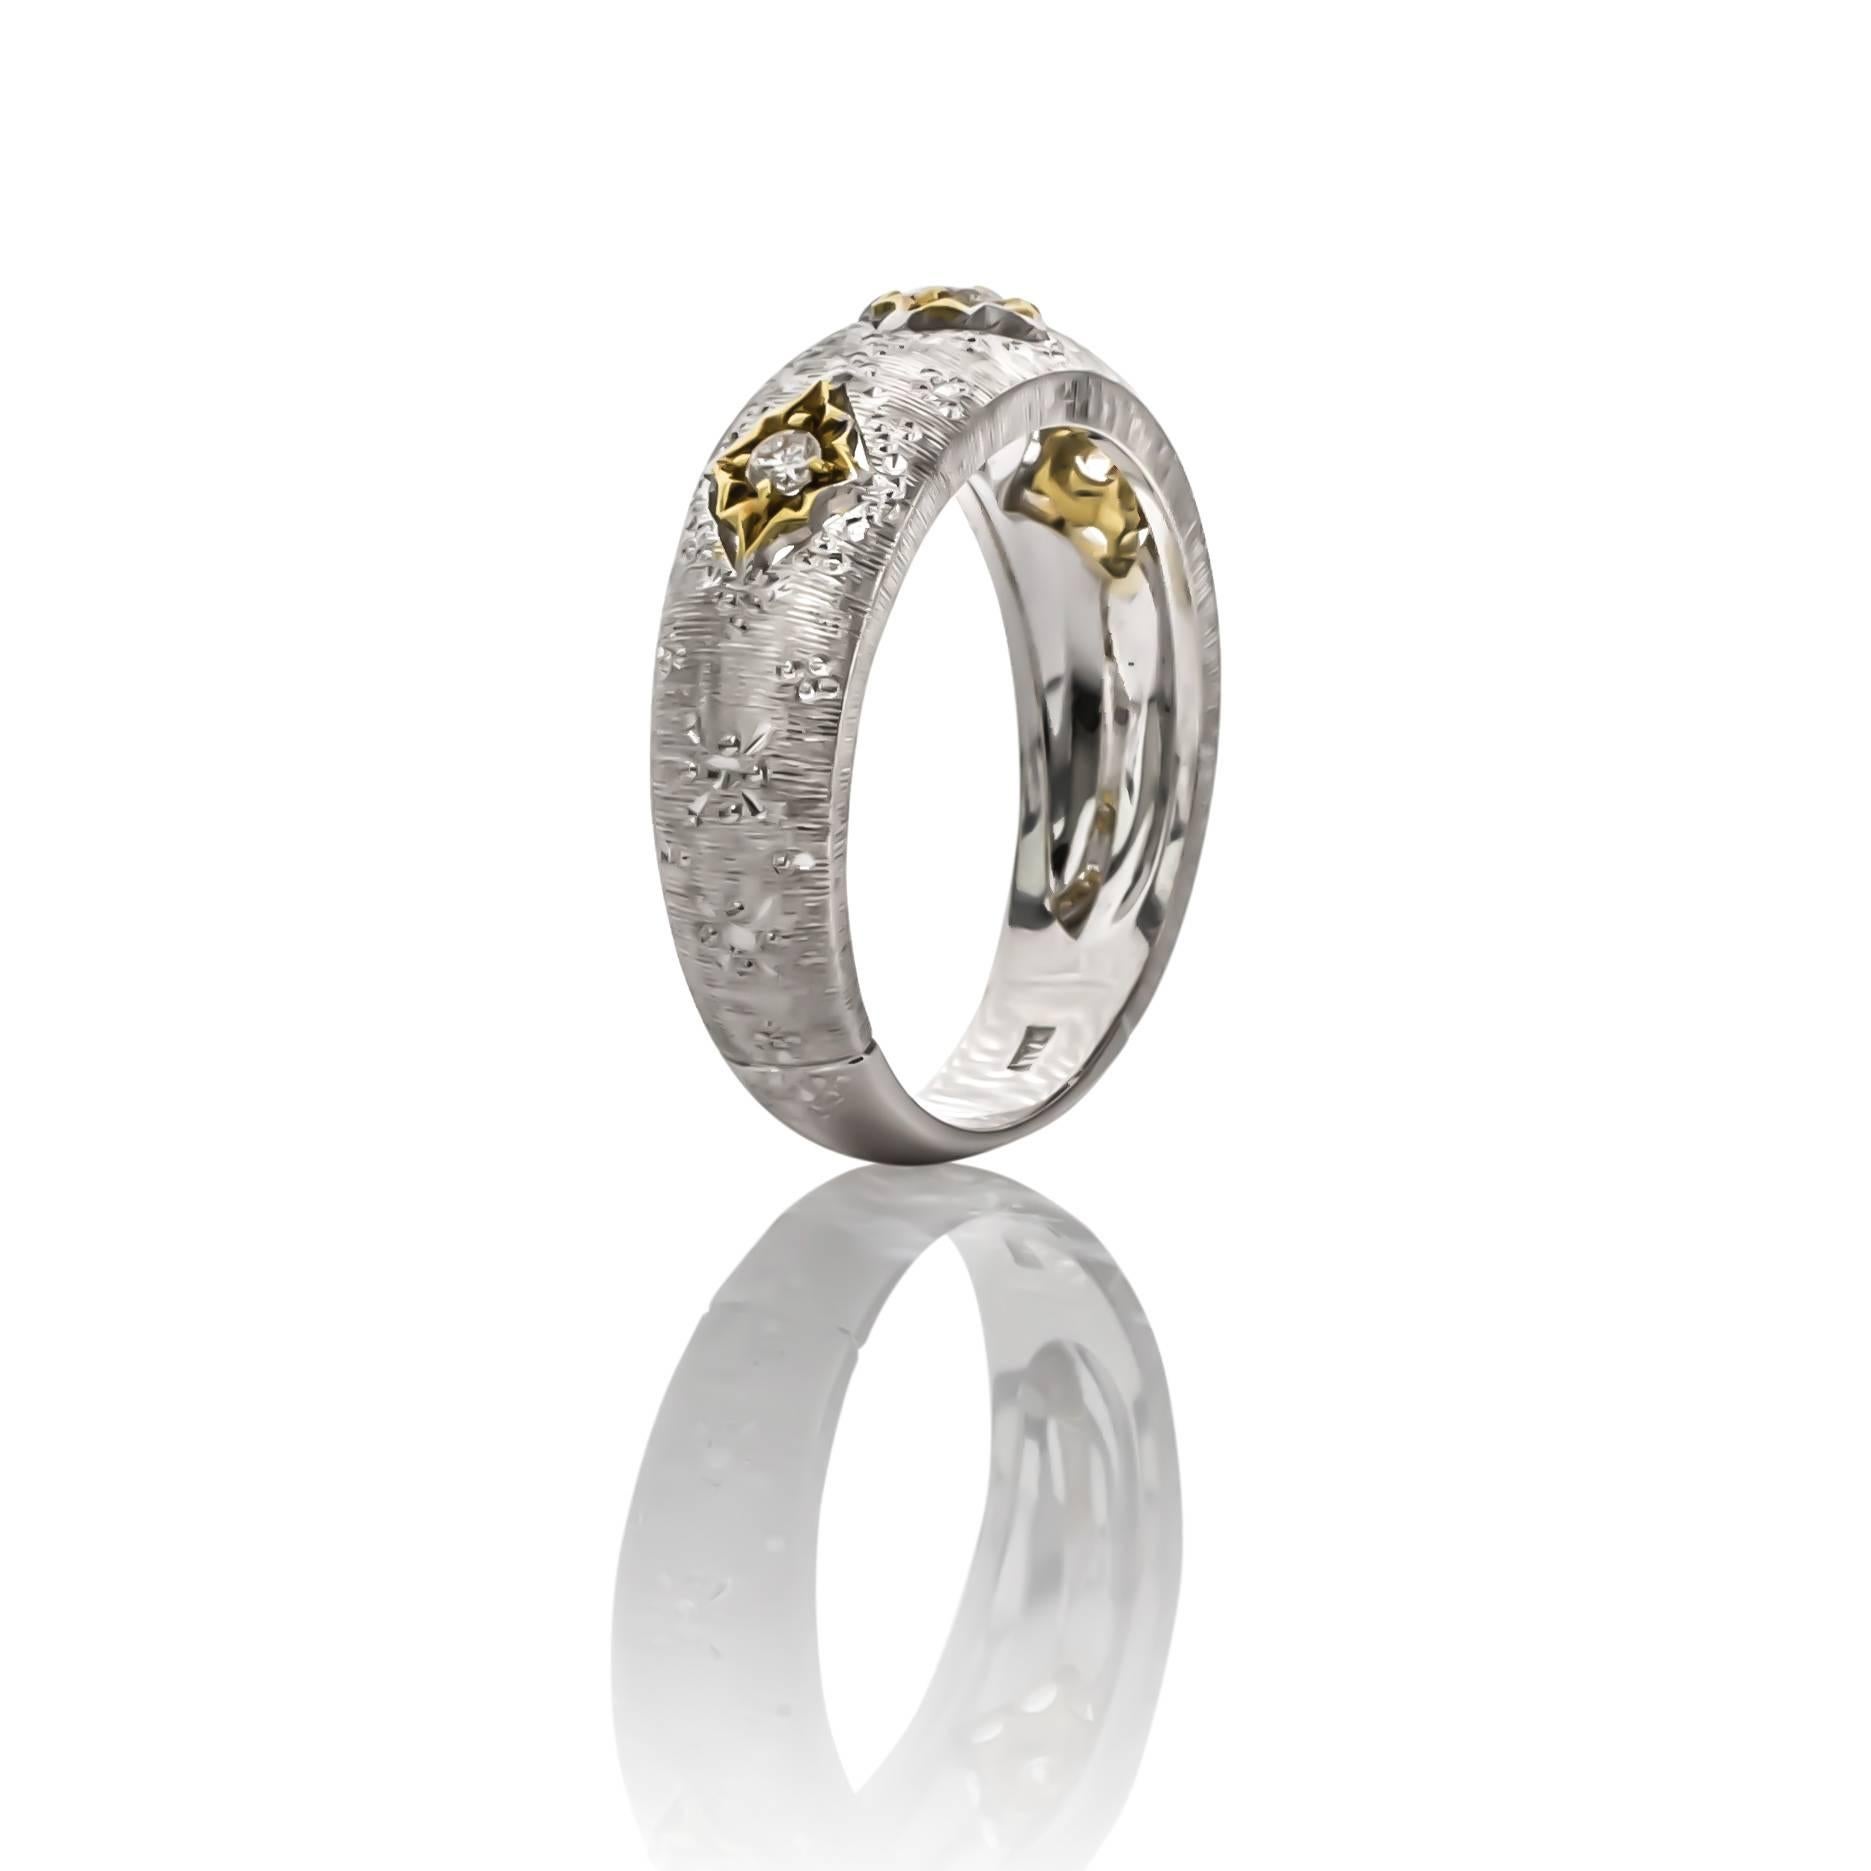 New: 18K white and yellow gold diamond ring, designed by F Vergano.  Set with round brilliant cut diamonds weighing .11 carats total weight, F-G color and VS clarity.

Finger size 7